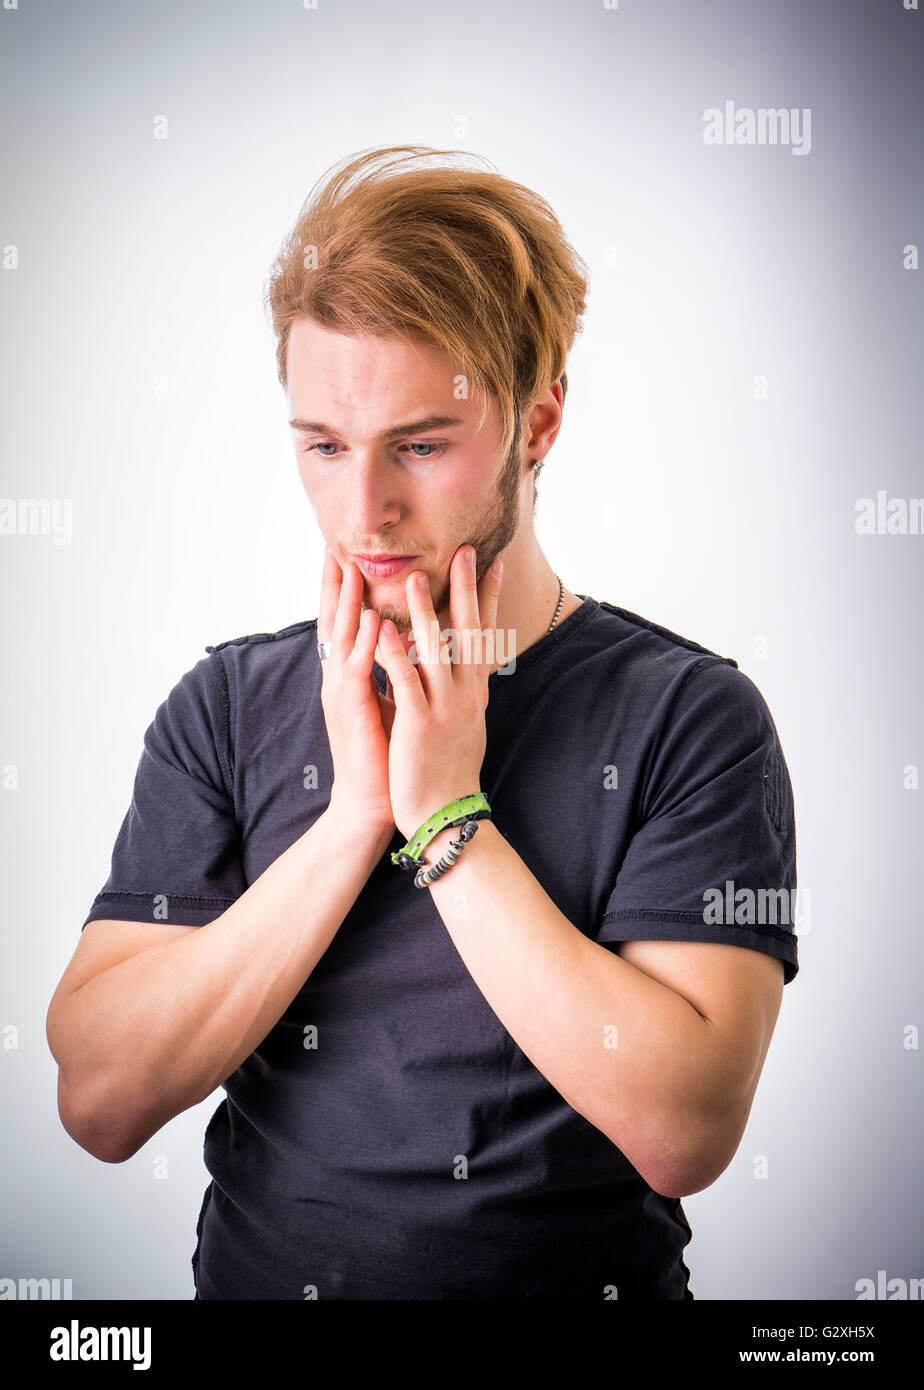 Sad or worried handsome young man looking down, on light background Stock Photo